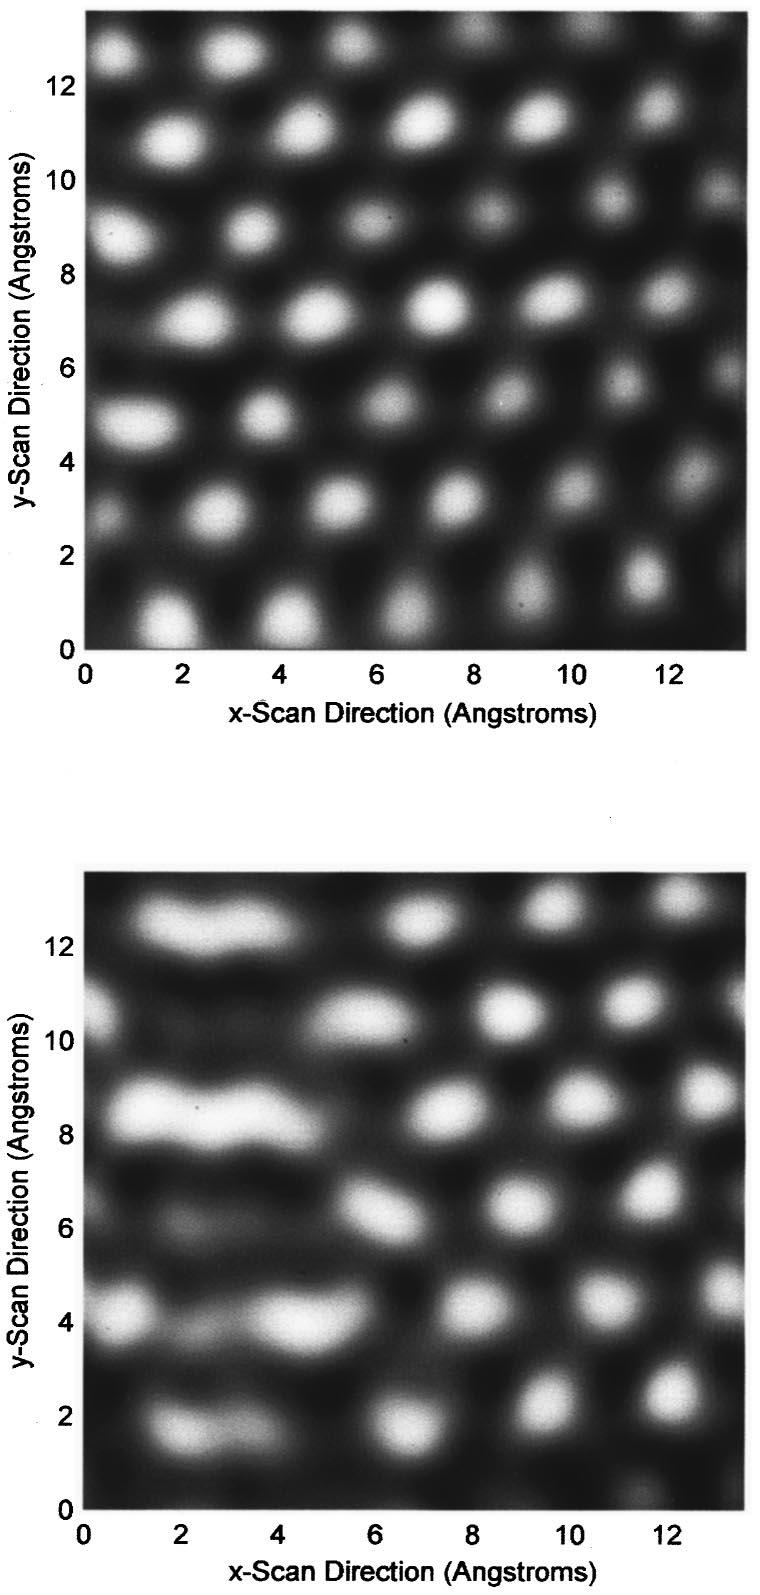 4604 Rev. Sci. Instrum., Vol. 70, No. 12, December 1999 D. Croft and S. Devasia FIG. 5. Experimental surface images without vibration compensation: 50 Hz scan rate top and 445 Hz scan rate bottom.